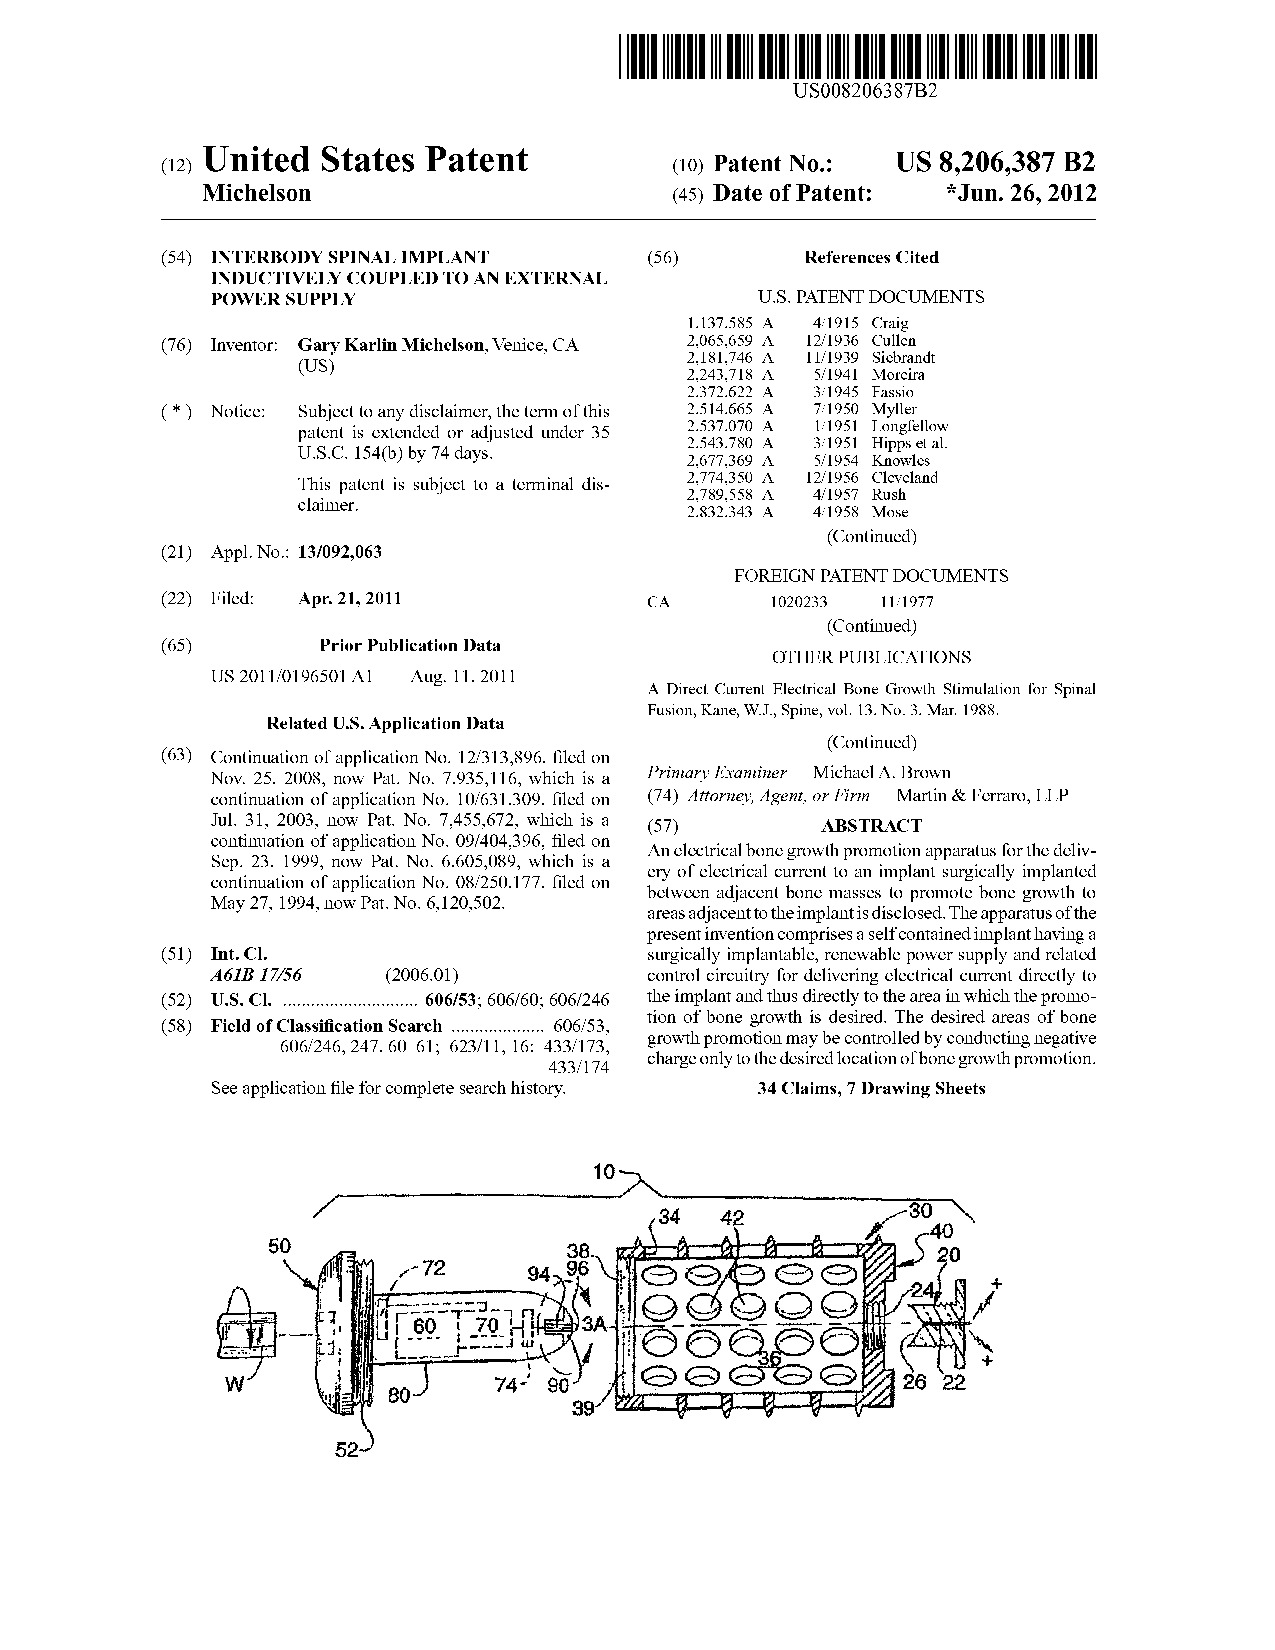 Interbody spinal implant inductively coupled to an external power supply - Patent 8,206,387